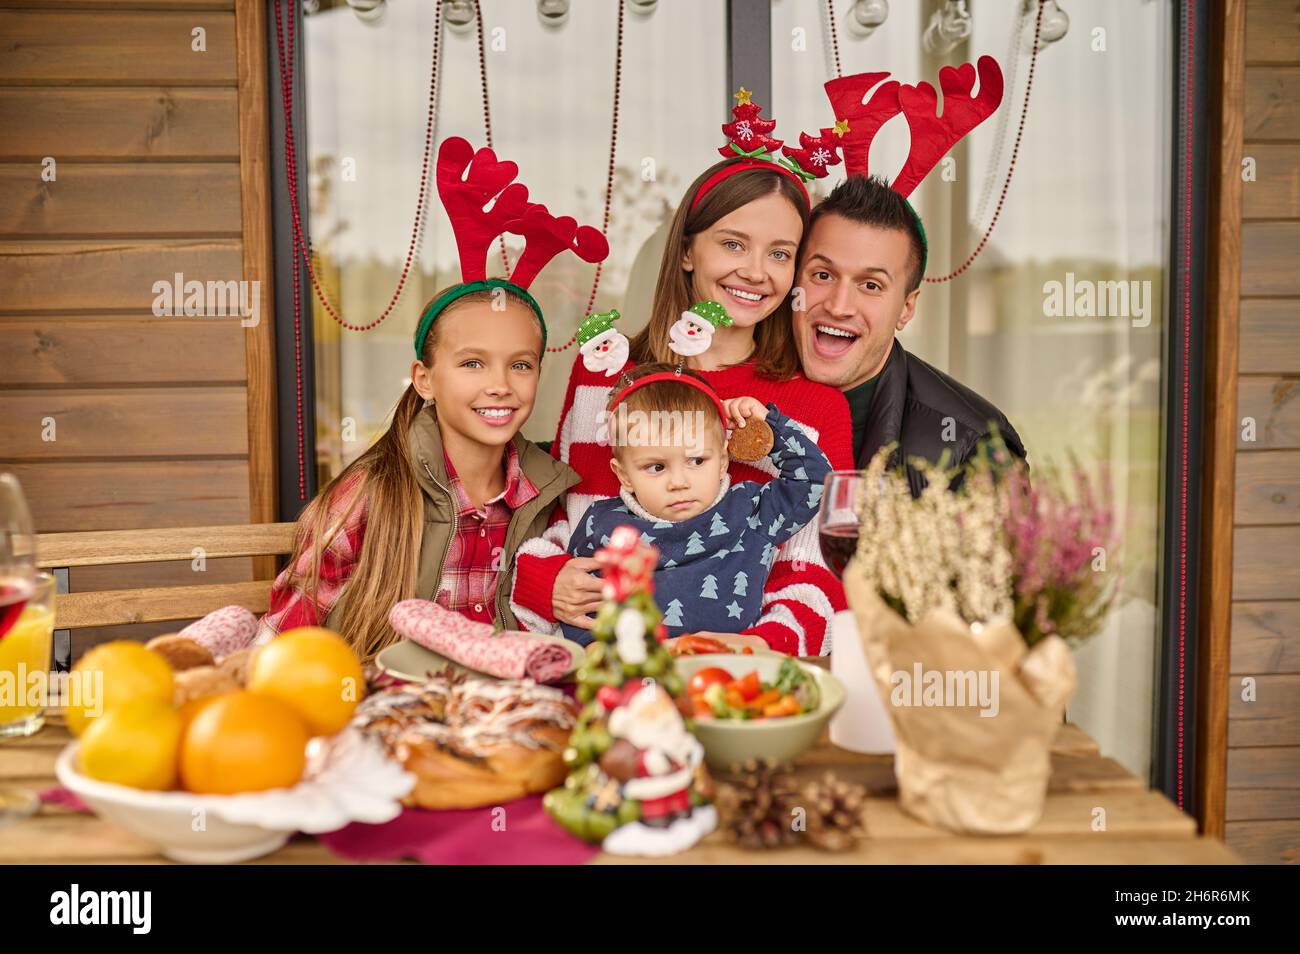 A cute family celebrating new year together Stock Photo